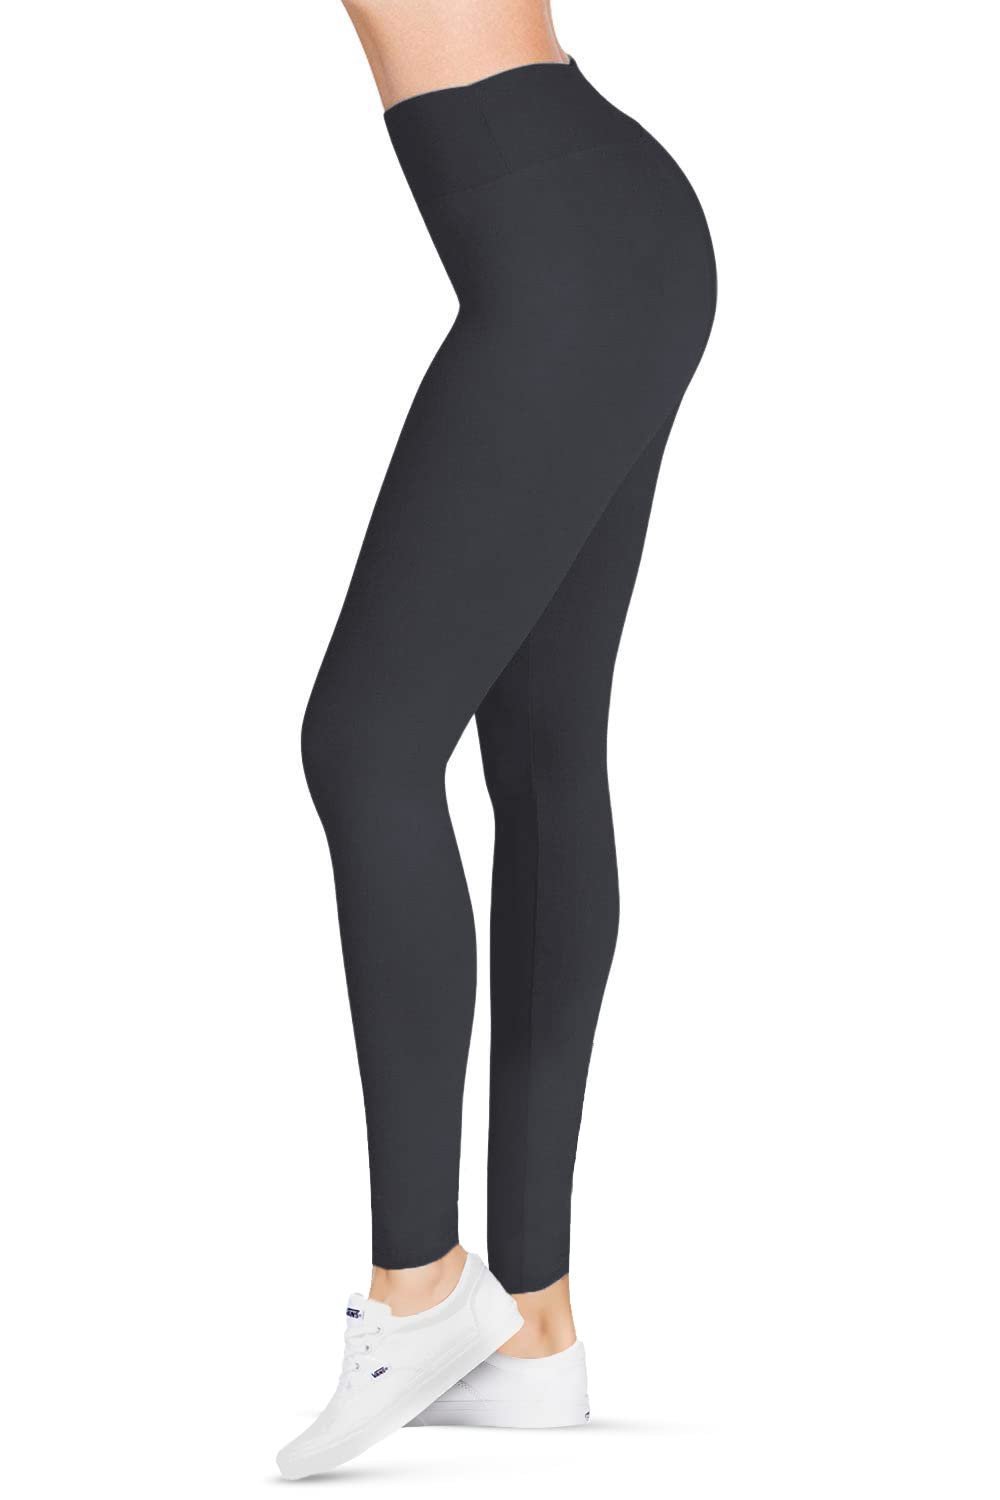 SATINA Charcoal High Waisted Leggings - Women's Workout & Yoga Leggings - Plus Size Available | 3 Inch Waistband